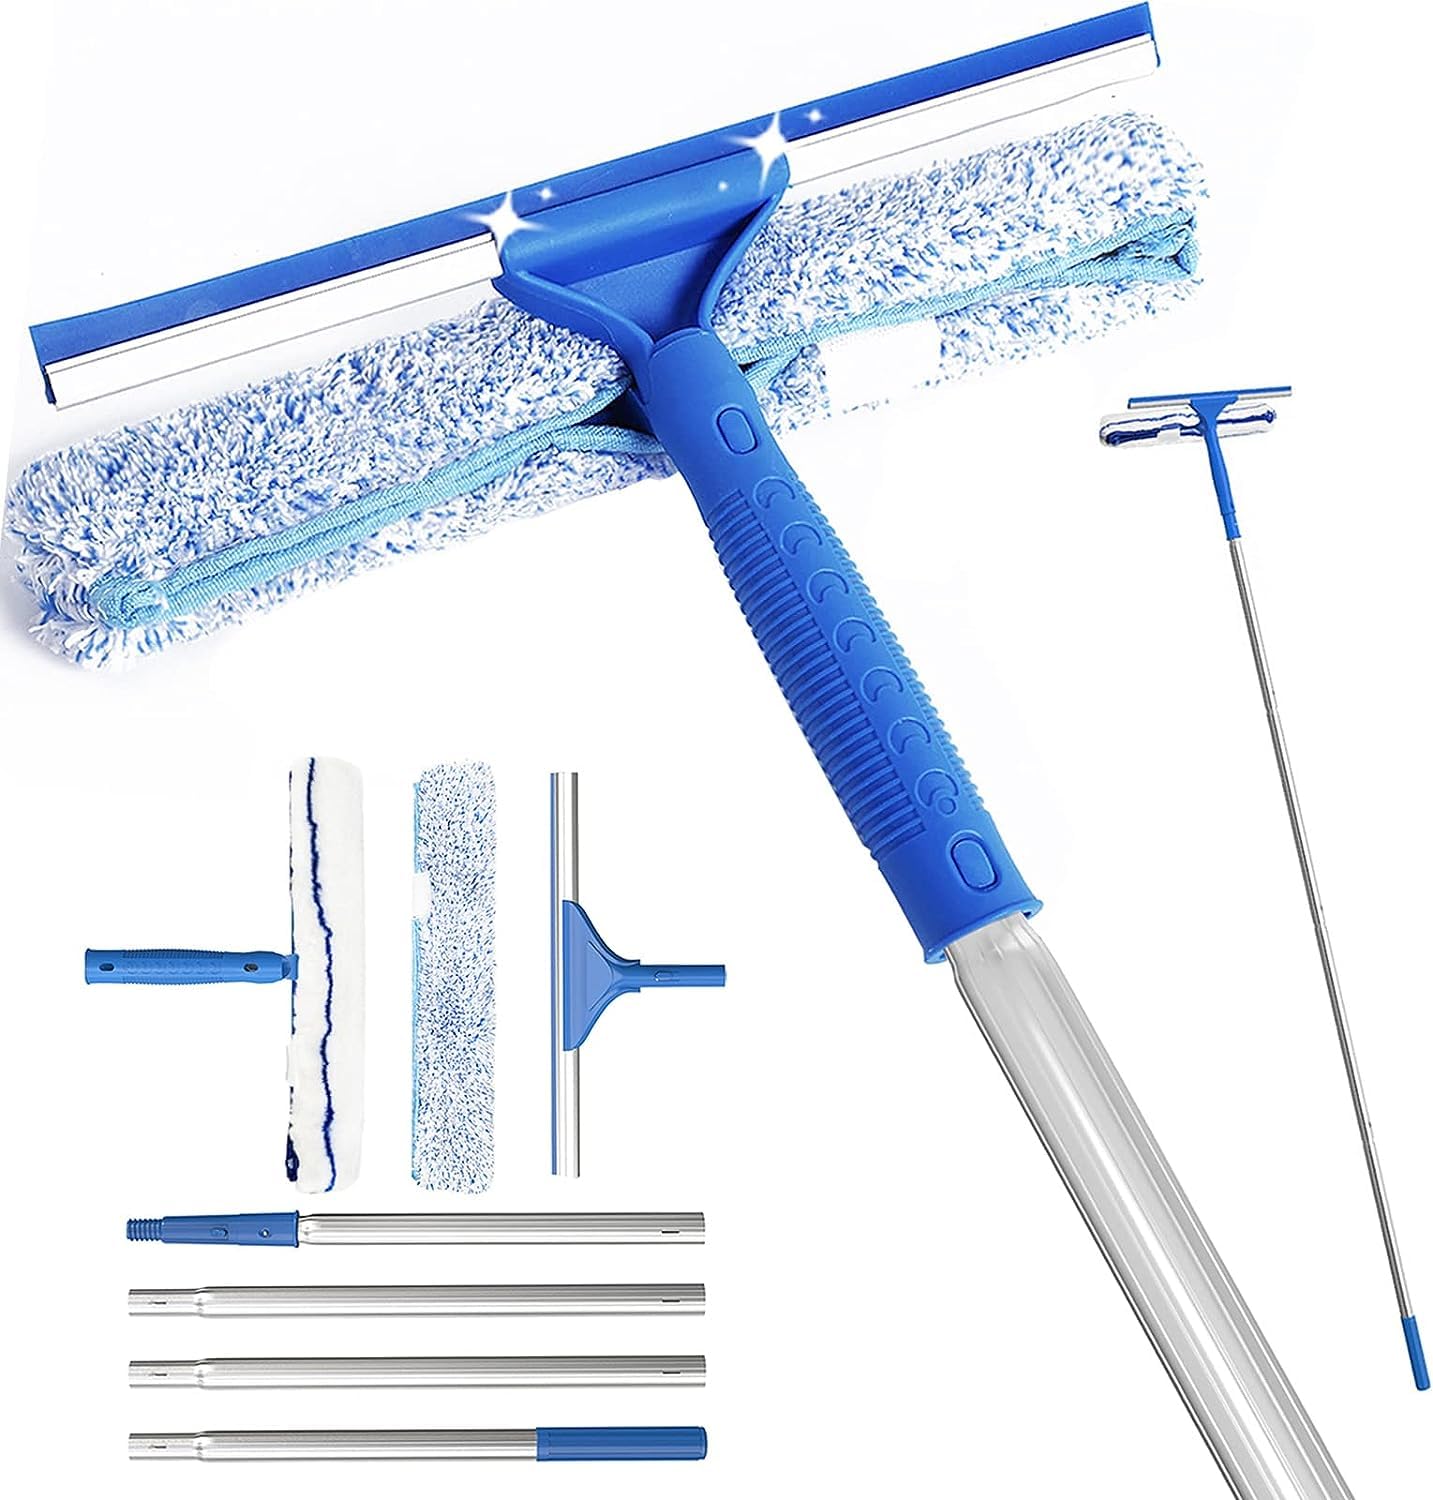 Jiaing 2 in 1 Window Squeegee with 64.9 inch Long Handle, Window Cleaning Squeegee Kit for Glass Door, Car Windshield, Mirror, Home, Blue